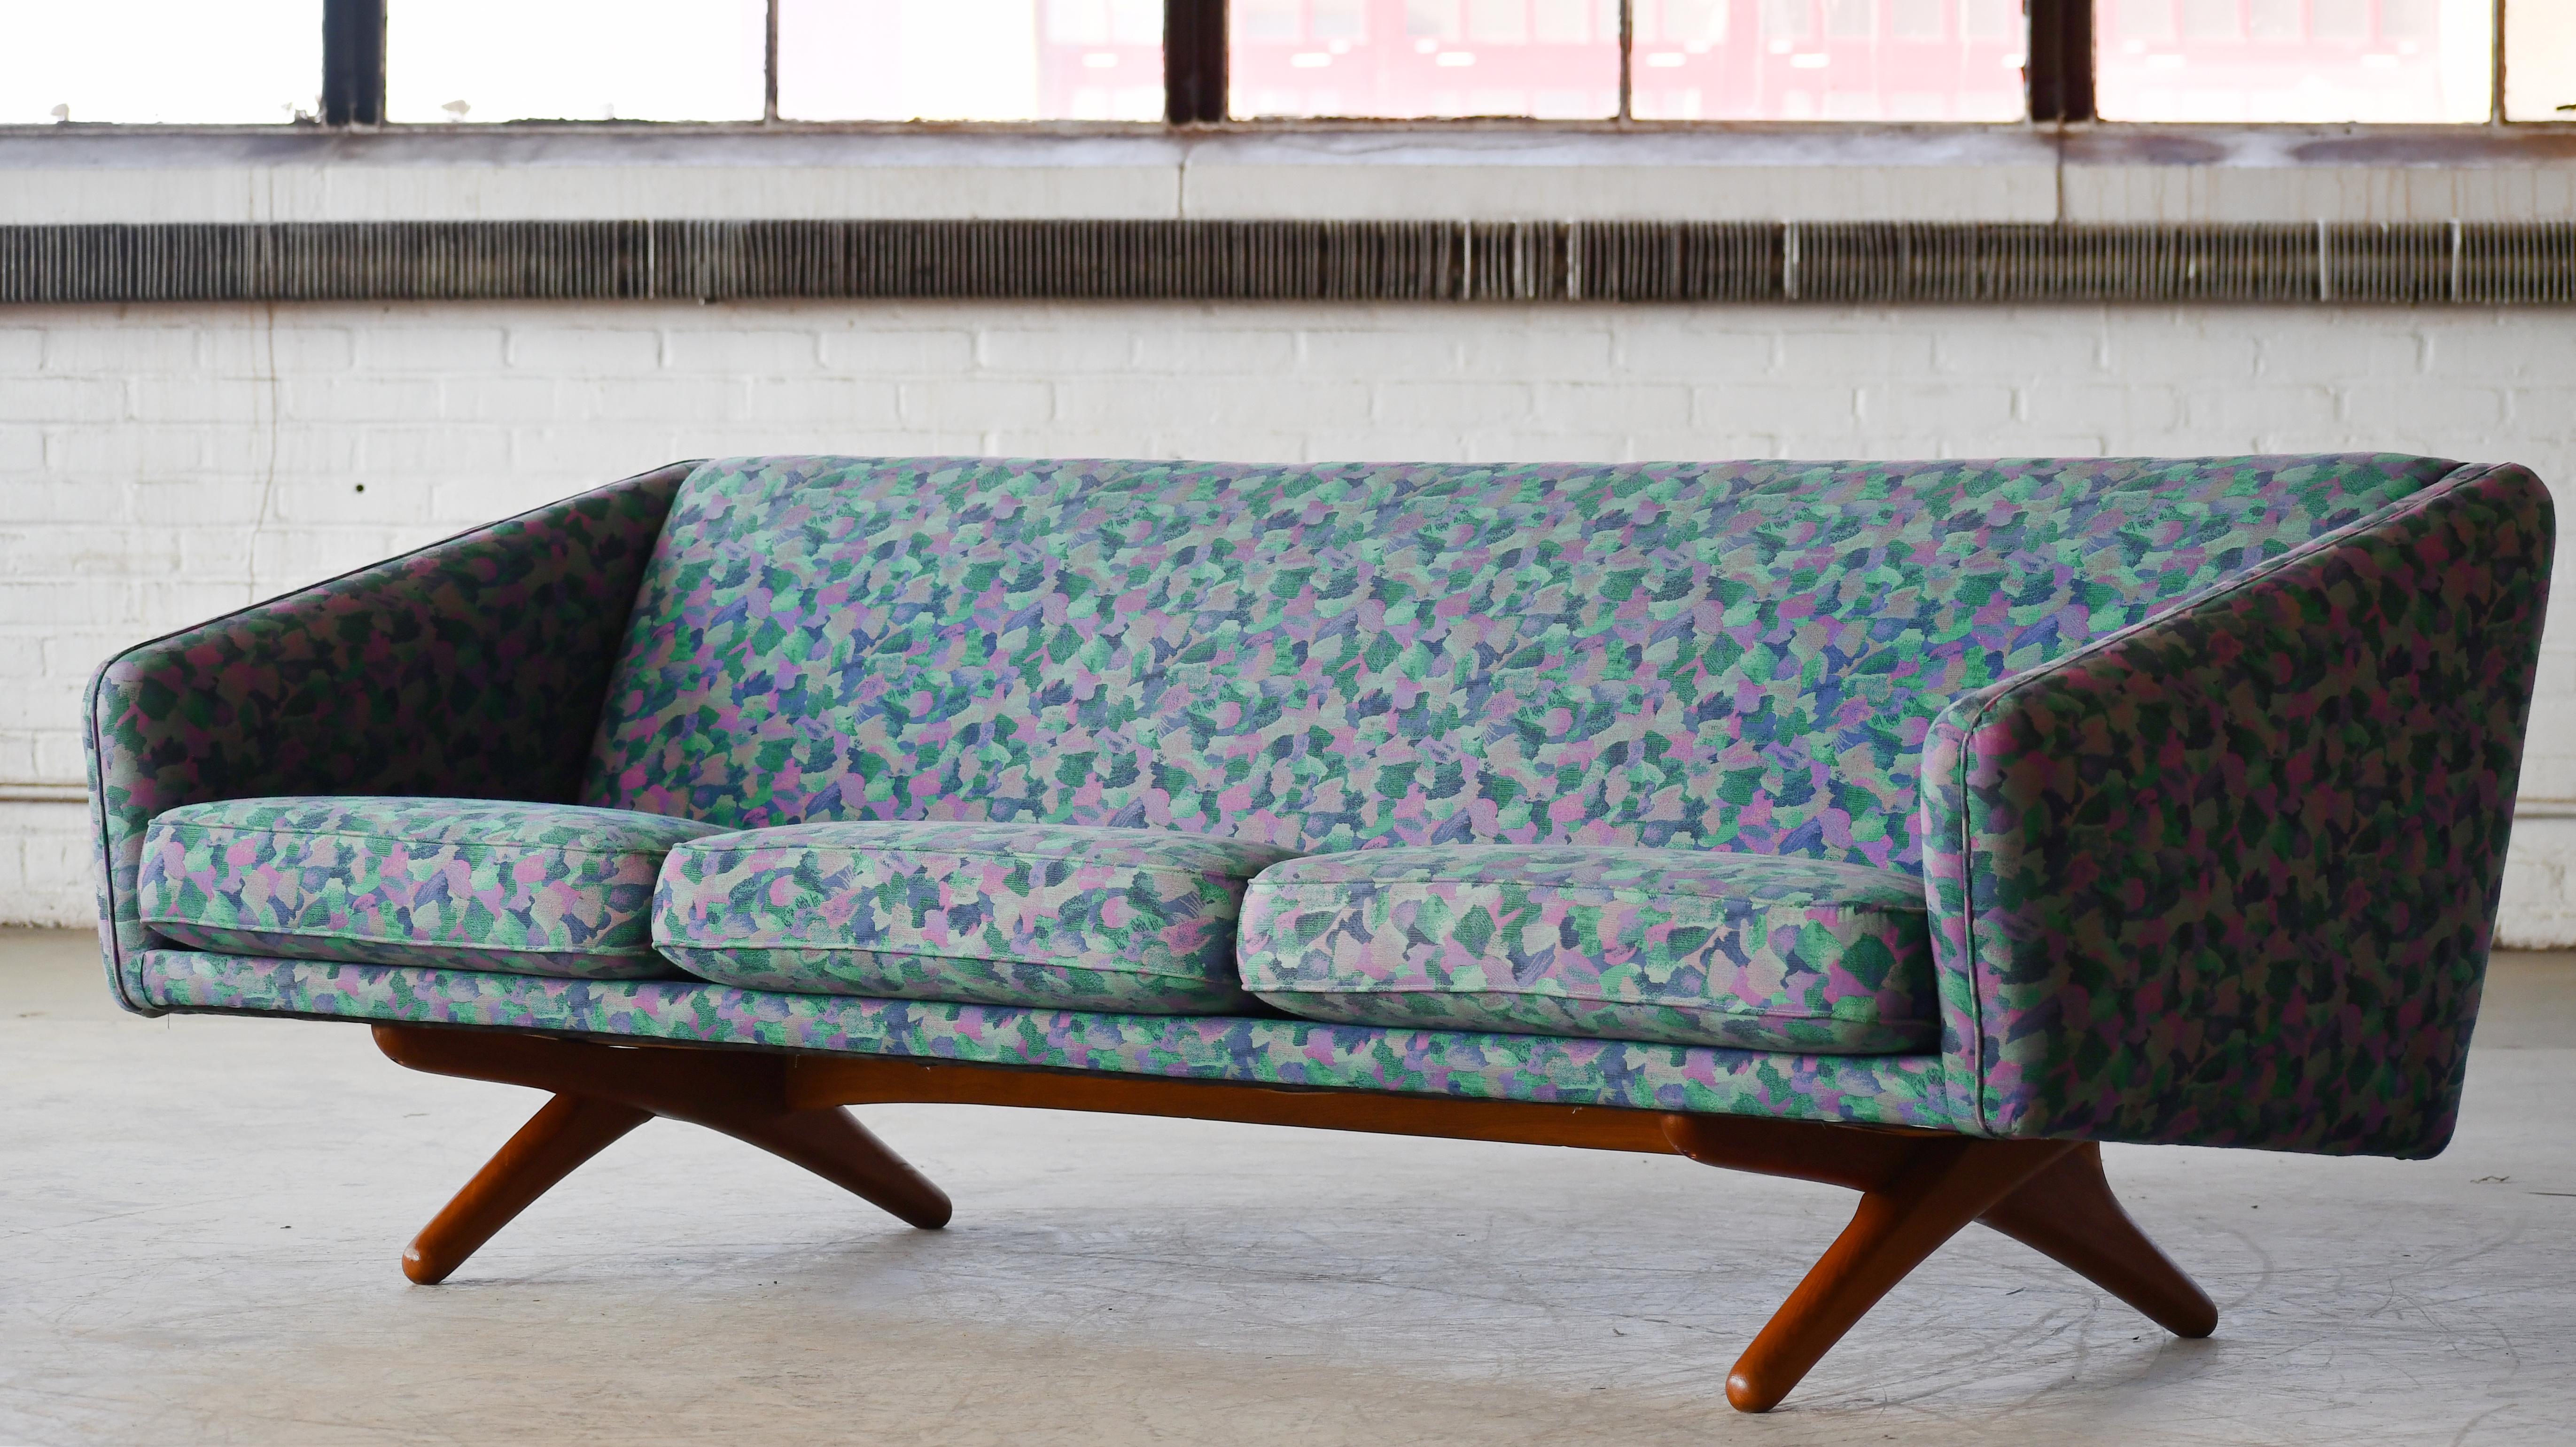 Beautiful Iconic Danish modern sofa by famed Illum Wikkelso. Clean functional and very modern lines with loose cushions raised on cross legs and frame of oak. Made in the second half of the 1960's. Reupholstered at a later point in a multicolored